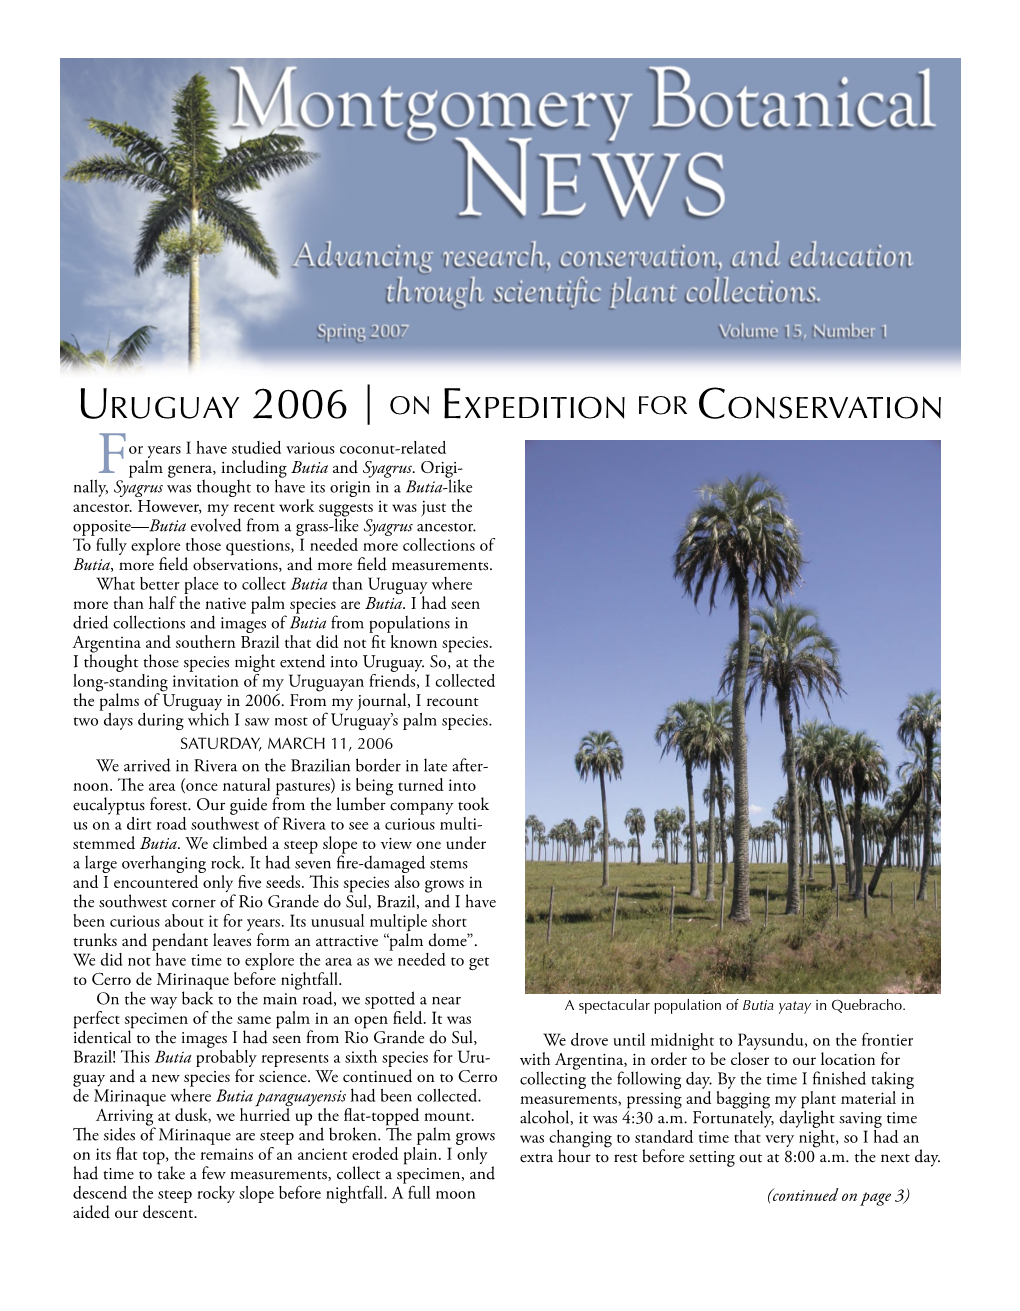 URUGUAY 2006 | on EXPEDITION for CONSERVATION Or Years I Have Studied Various Coconut-Related Palm Genera, Including Butia and Syagrus